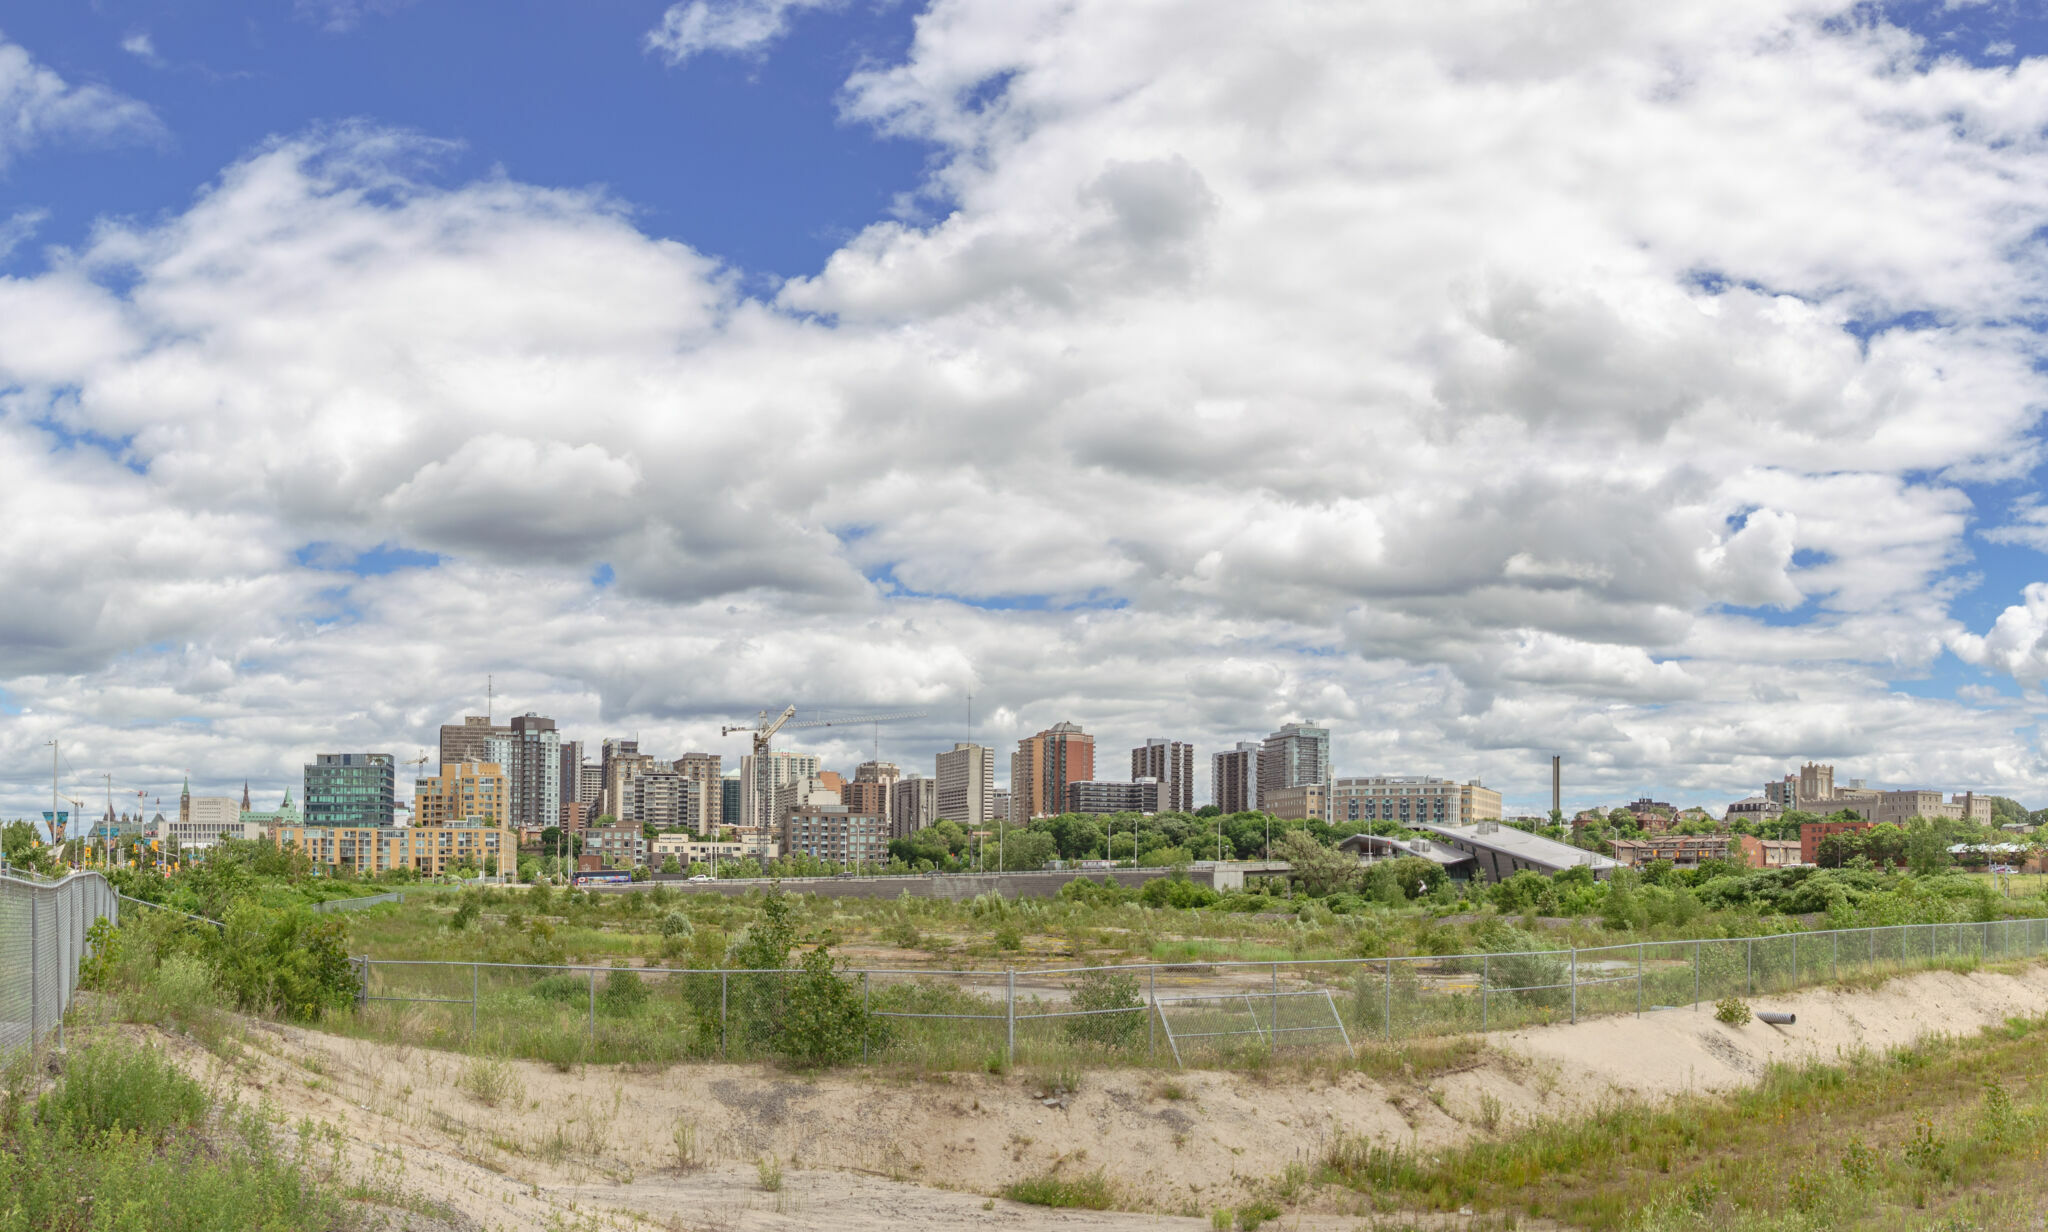 A view of the Flats Phase development site at LeBreton Flats